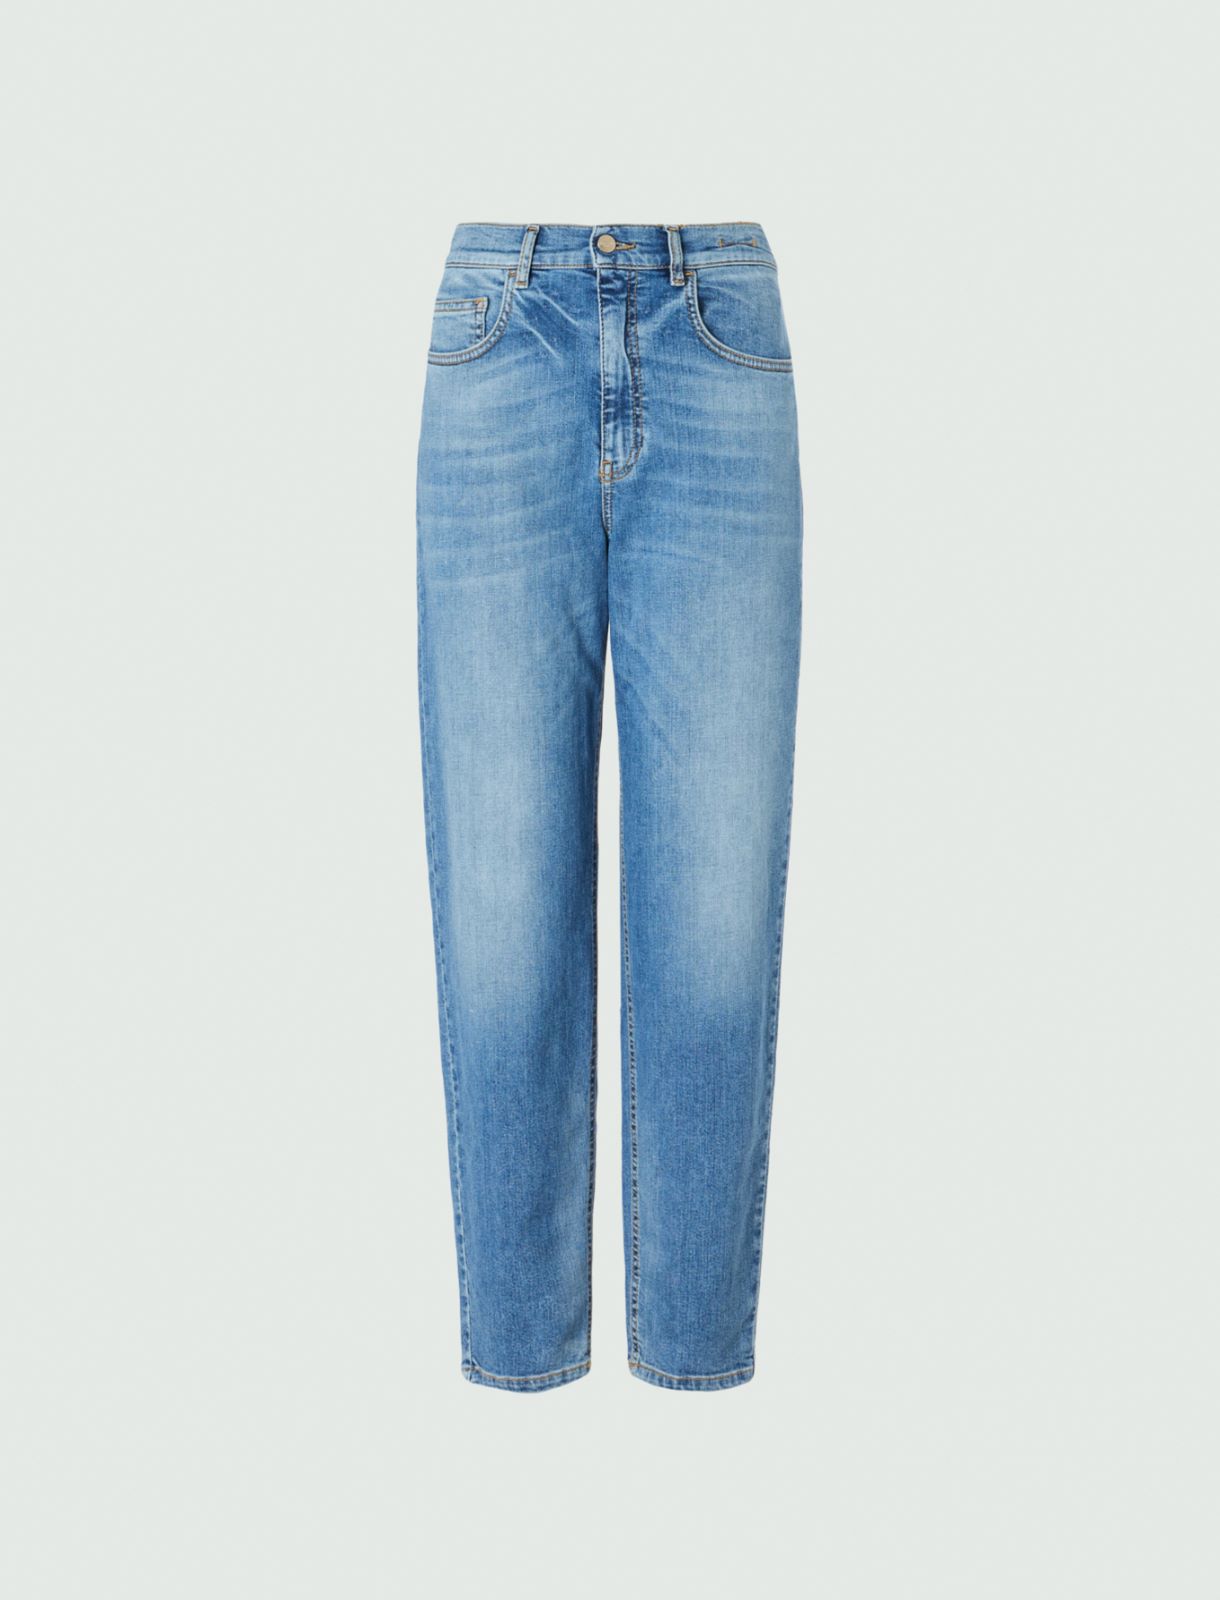 Jeans mom fit - Blue jeans - Marella - 6